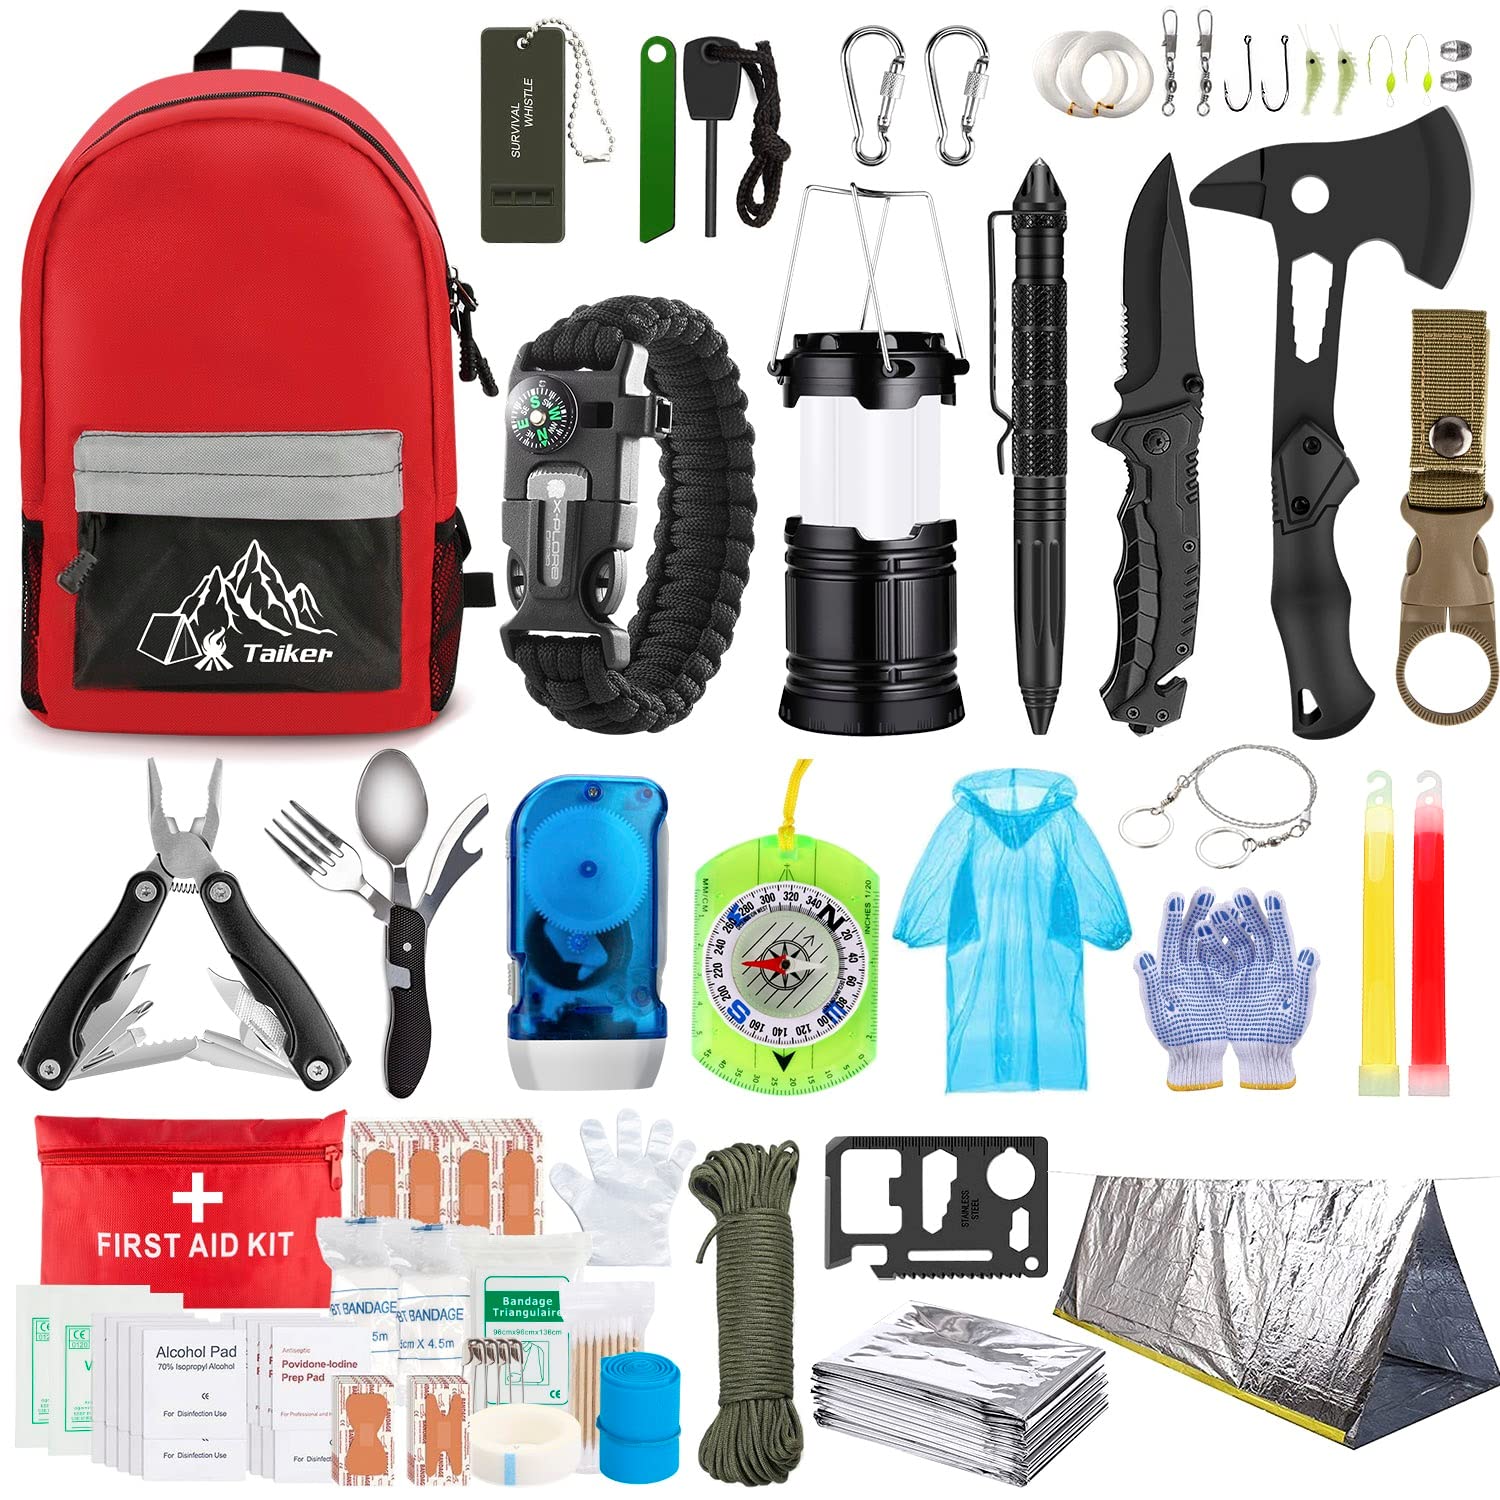 Survival tool kit 14 in 1, Survival Gear and Equipment, Camping Accessories